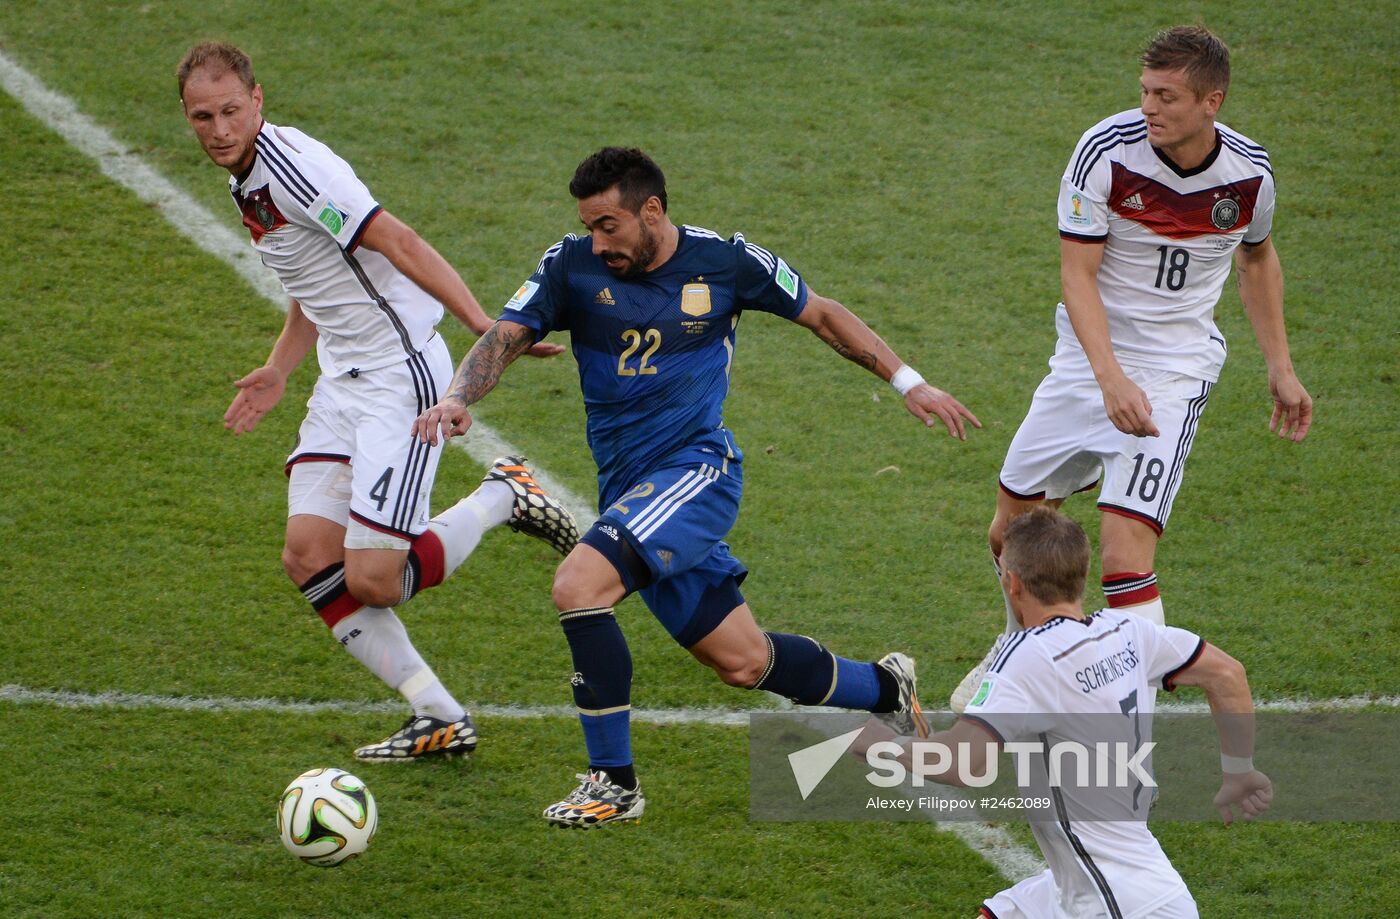 2014 FIFA World Cup Final. Germany vs. Argentina